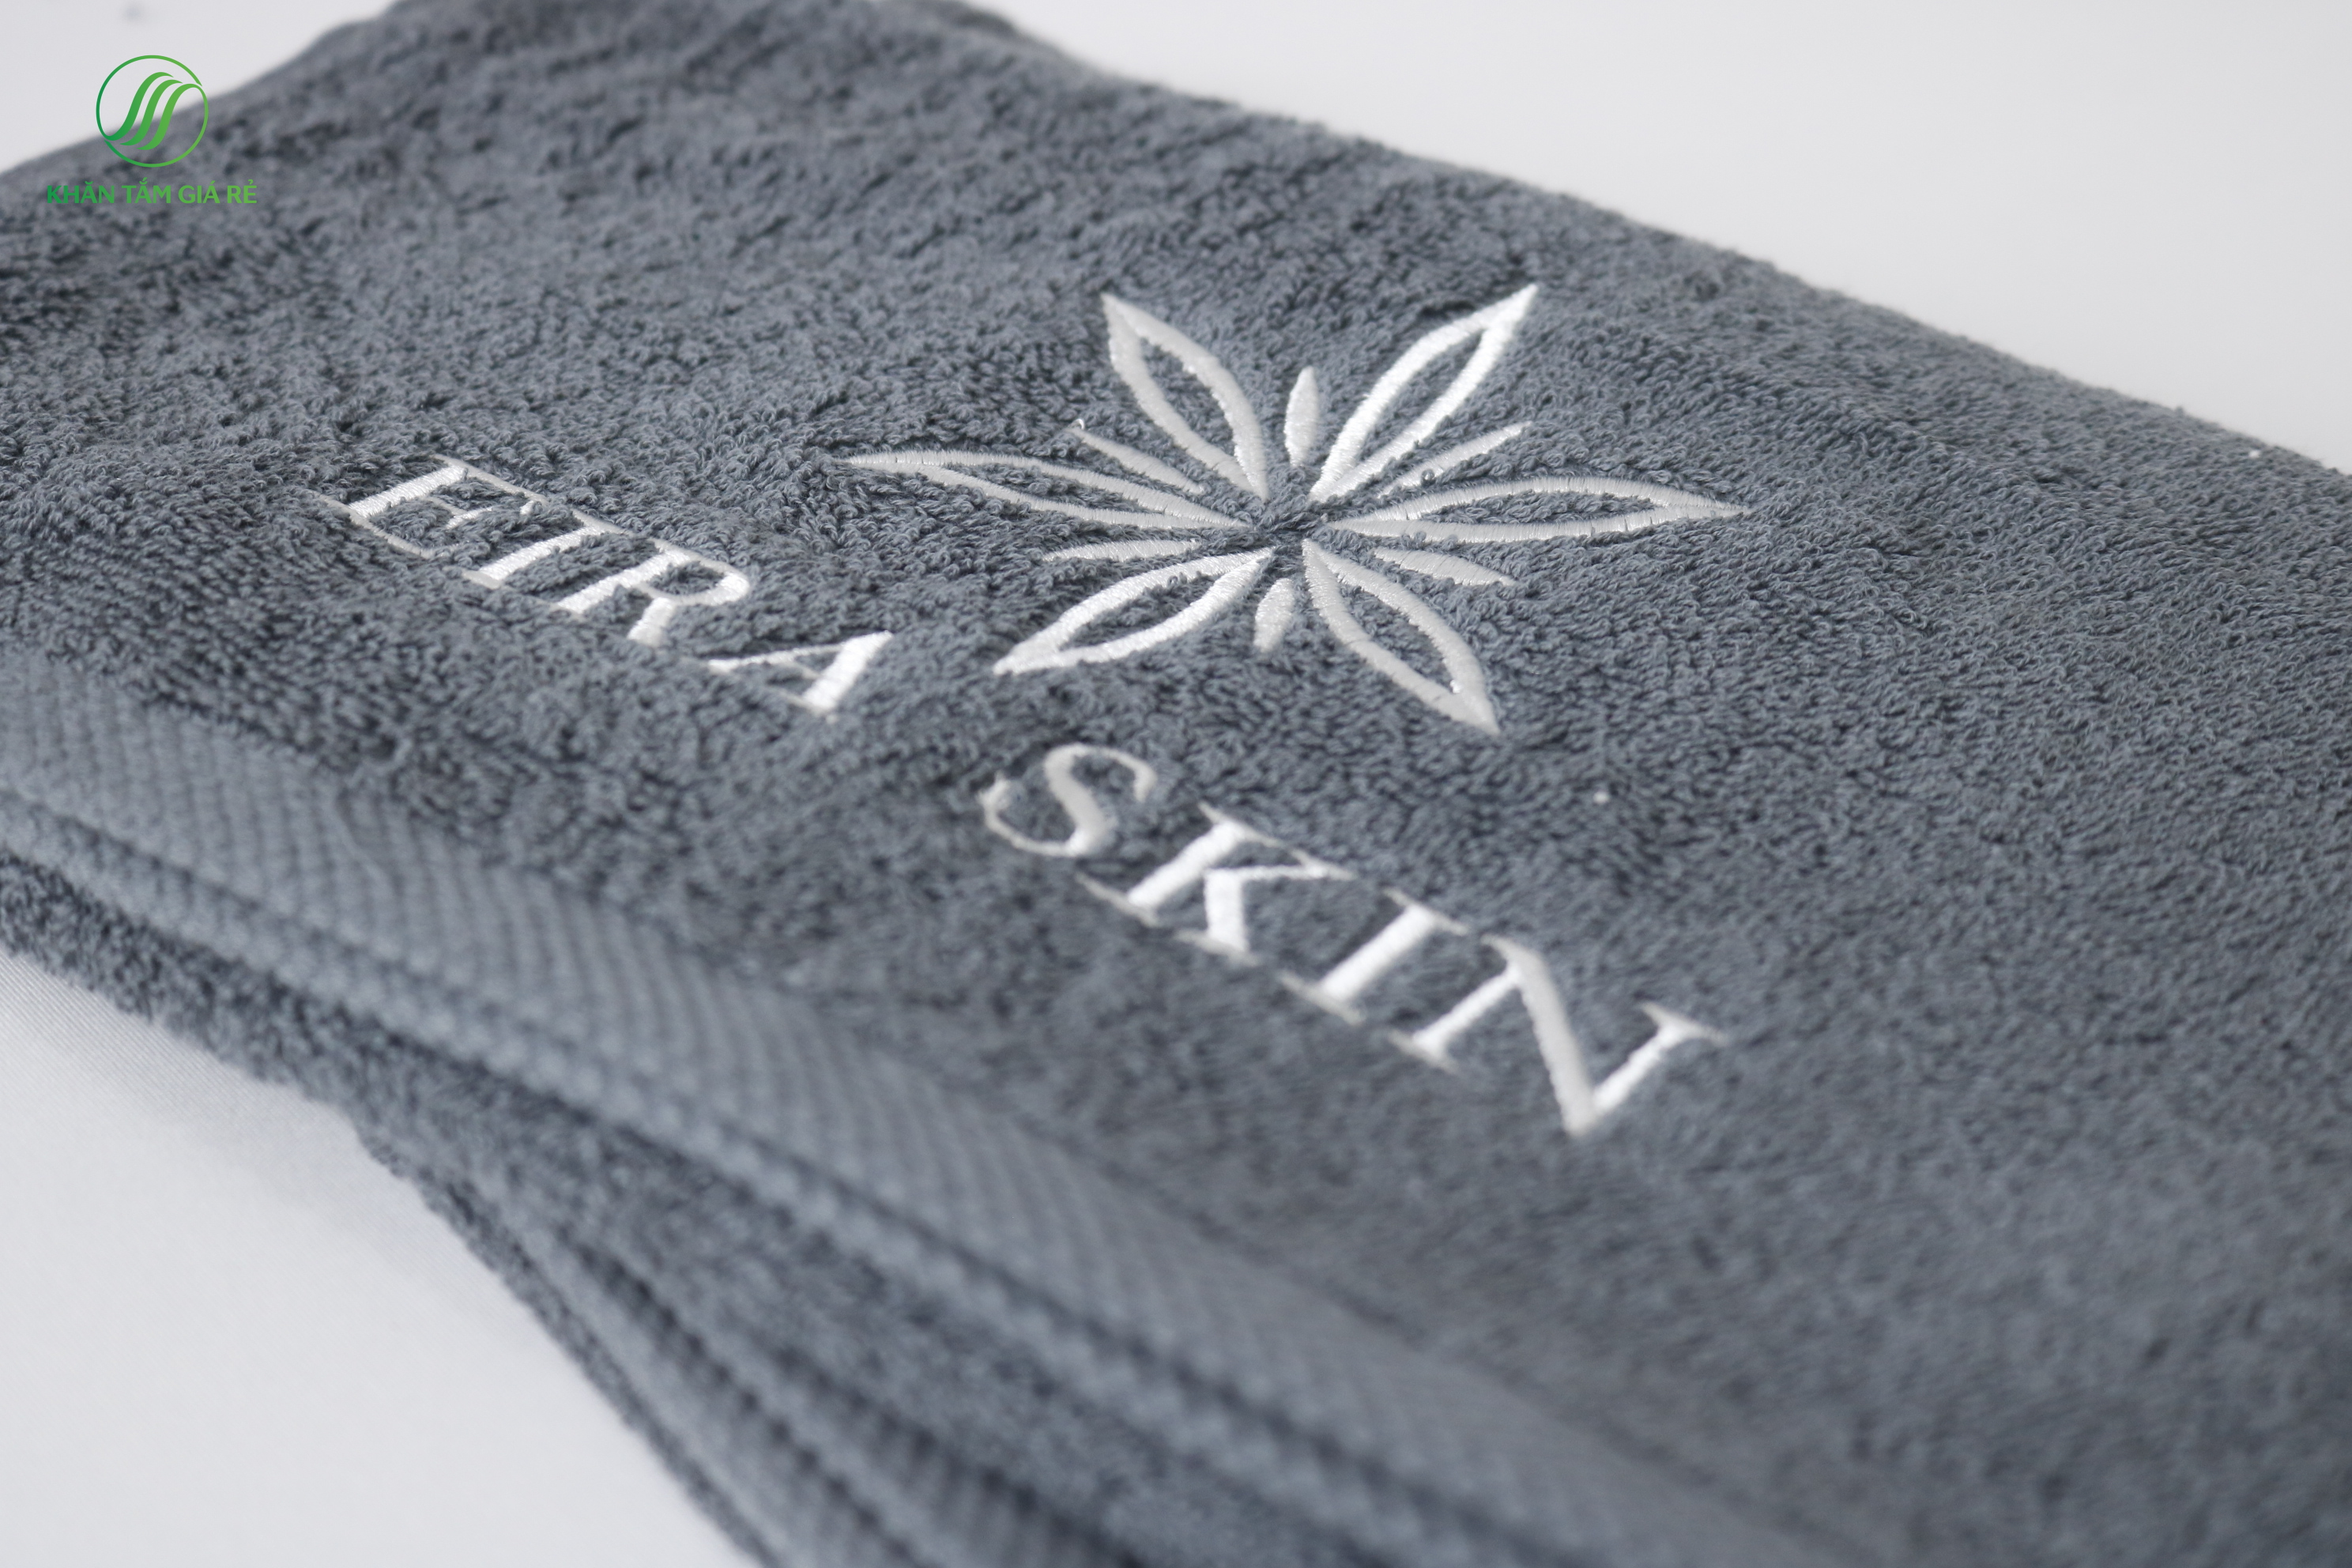 Towels the hotel is widgets from 5 star hotels to budget motels are a must have